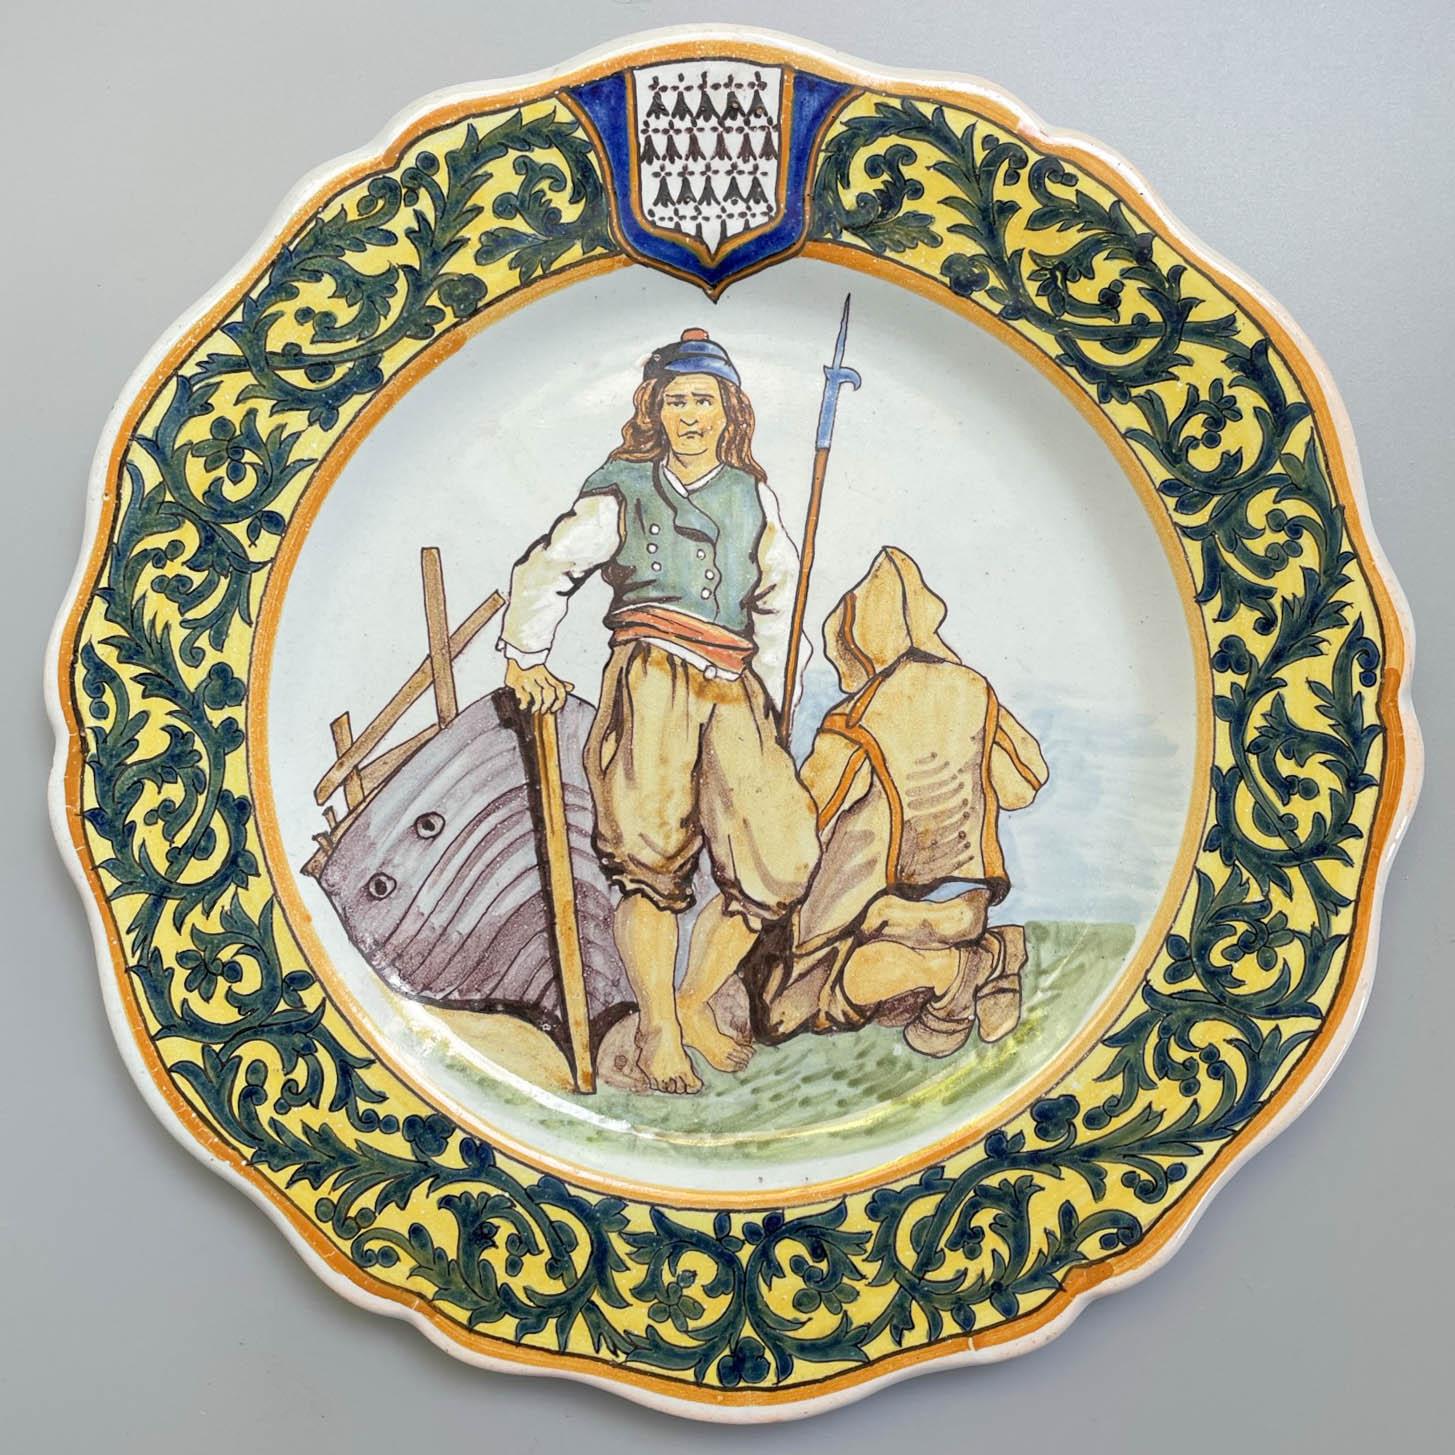 A 19th century French Porquier Beau Quimper faience plate with fisherman scene. Foliate border with Brittany coat of arms. Good details. Small chips to glaze on back rim. Signed verso: PB Guissény. Minor wear. Circa 1895-1900.
Dimensions:  9.25